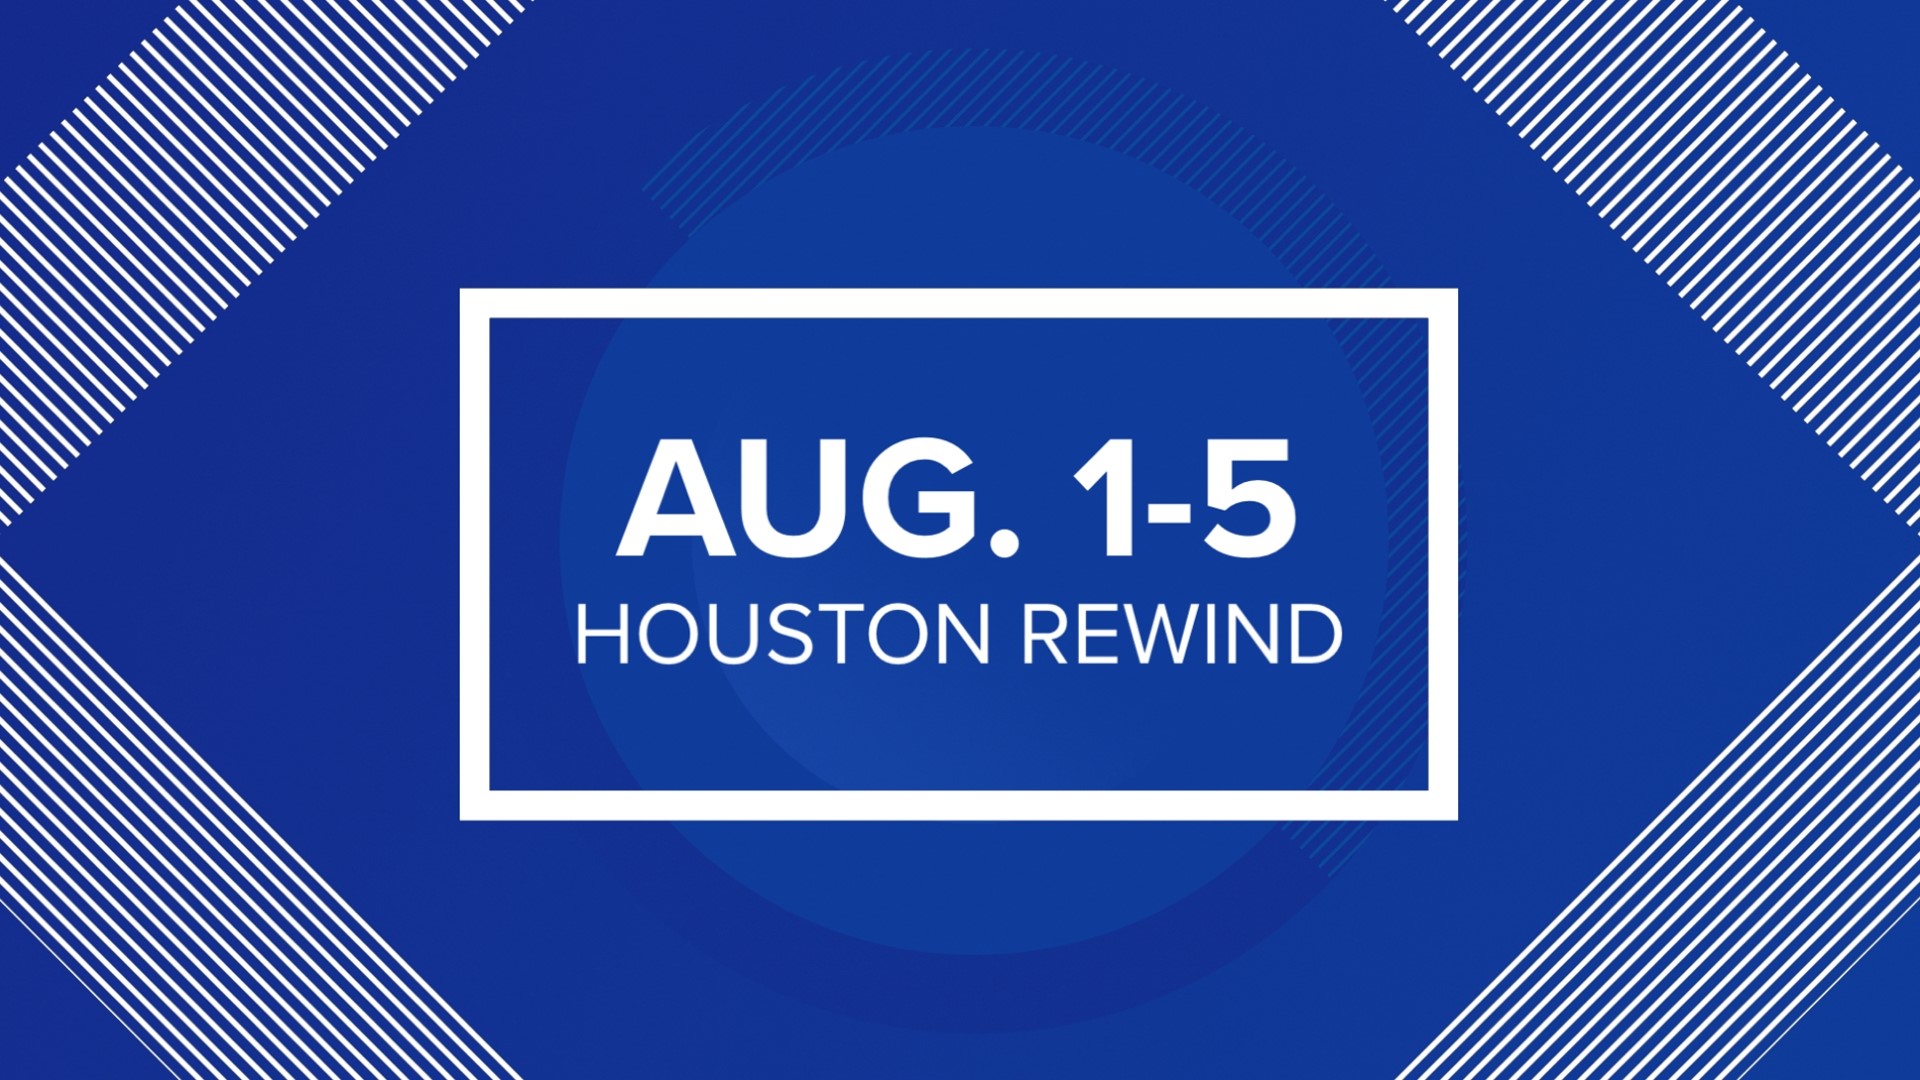 Catch up on the Houston-area news stories you may have missed this week!